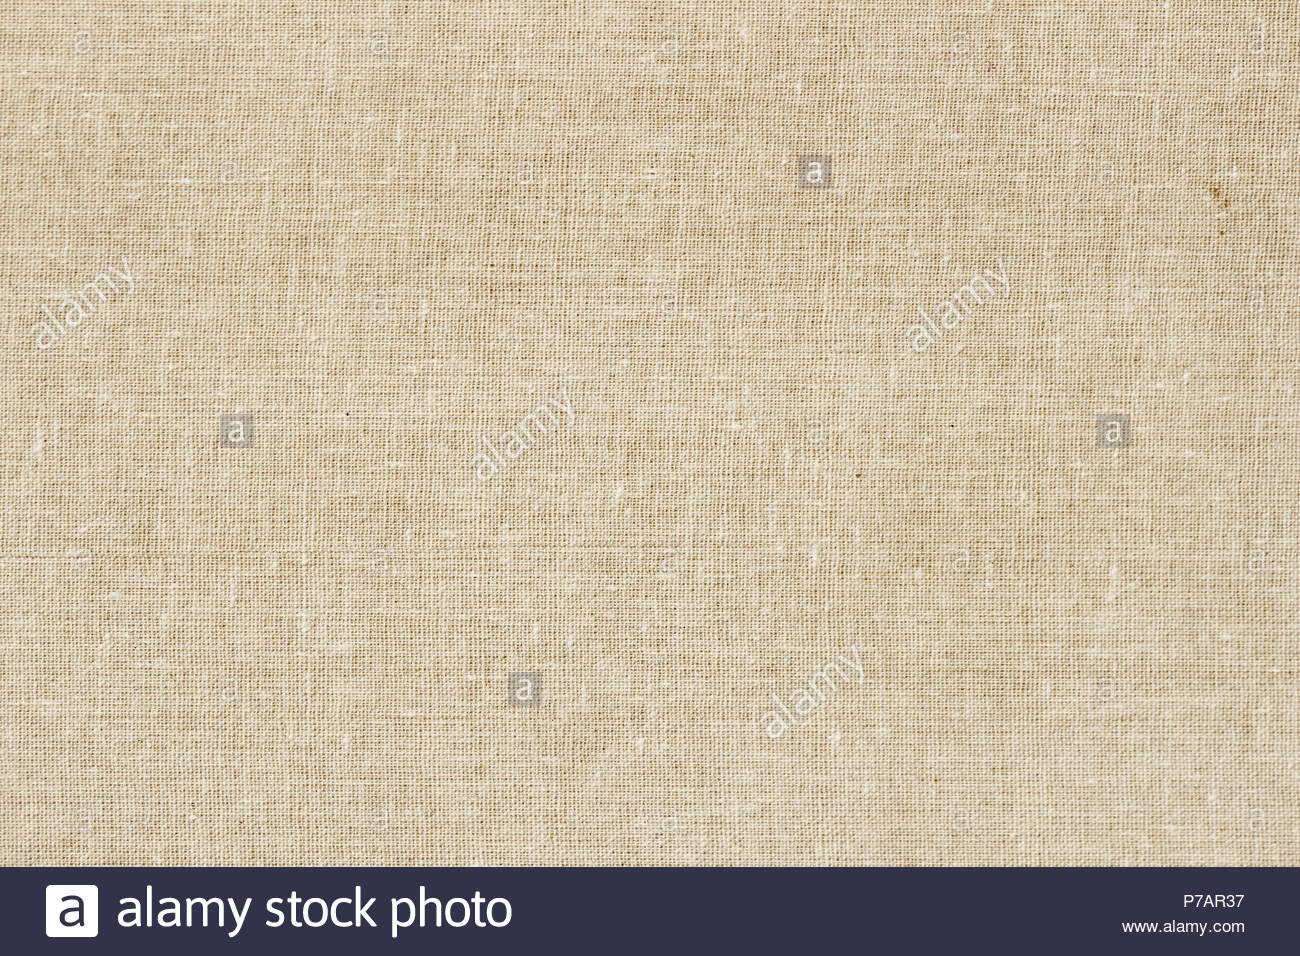 Free download Texture Old Jute Background High Resolution Stock ...